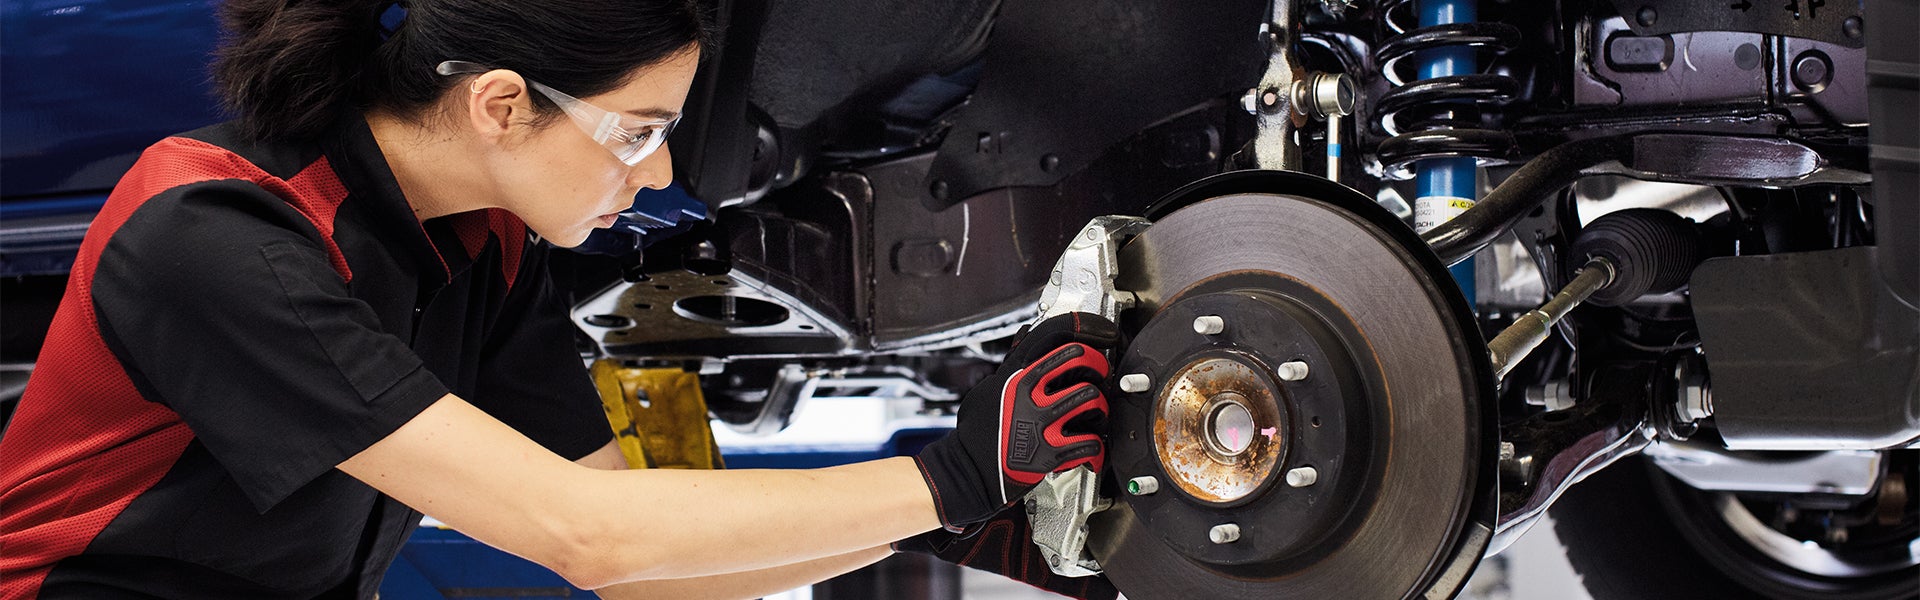 3 Main Benefits of Using OEM parts for your vehicle at Bennett Toyota of Allentown | Toyota service technician installing new brakes on a Toyota Tacoma